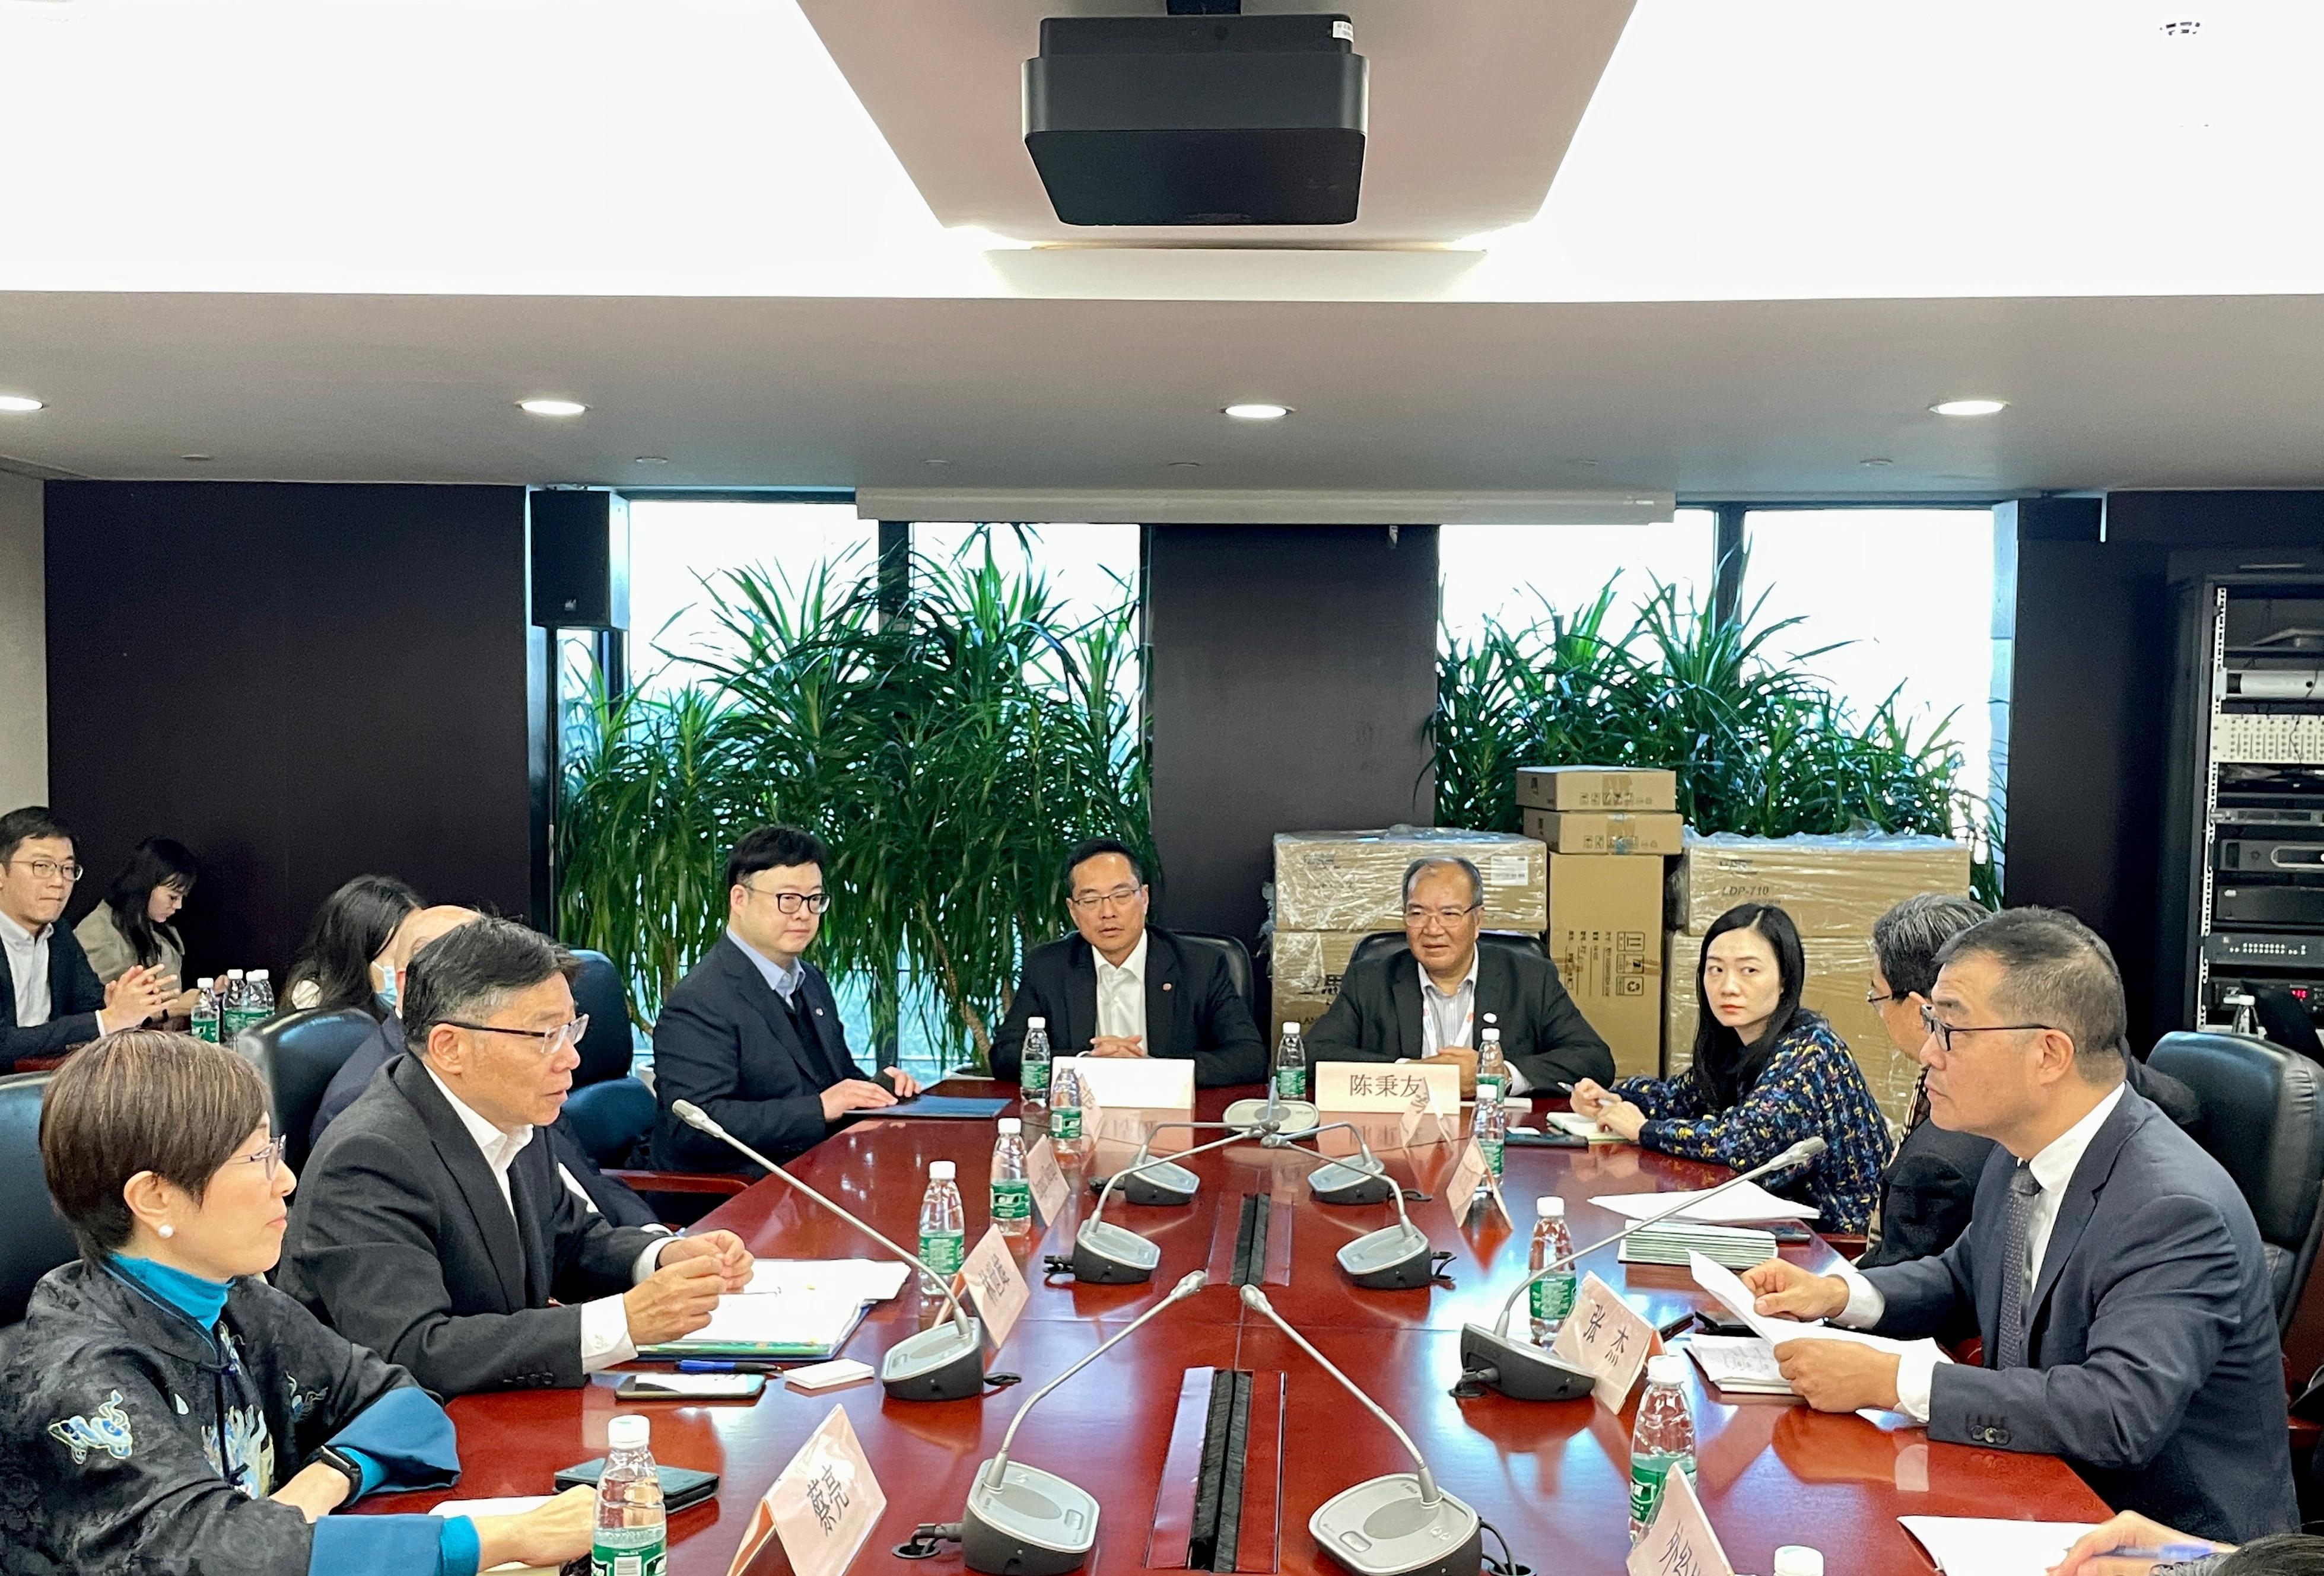 The Chairman of the Hong Kong Maritime and Port Board (HKMPB) and Secretary for Transport and Logistics, Mr Lam Sai-hung (second left), leads members of the HKMPB to meet with Deputy Director of the Shanghai Municipal Commission of Commerce Mr Zhang Jie (first right), today (December 5) to exchange views on issues of mutual concern.